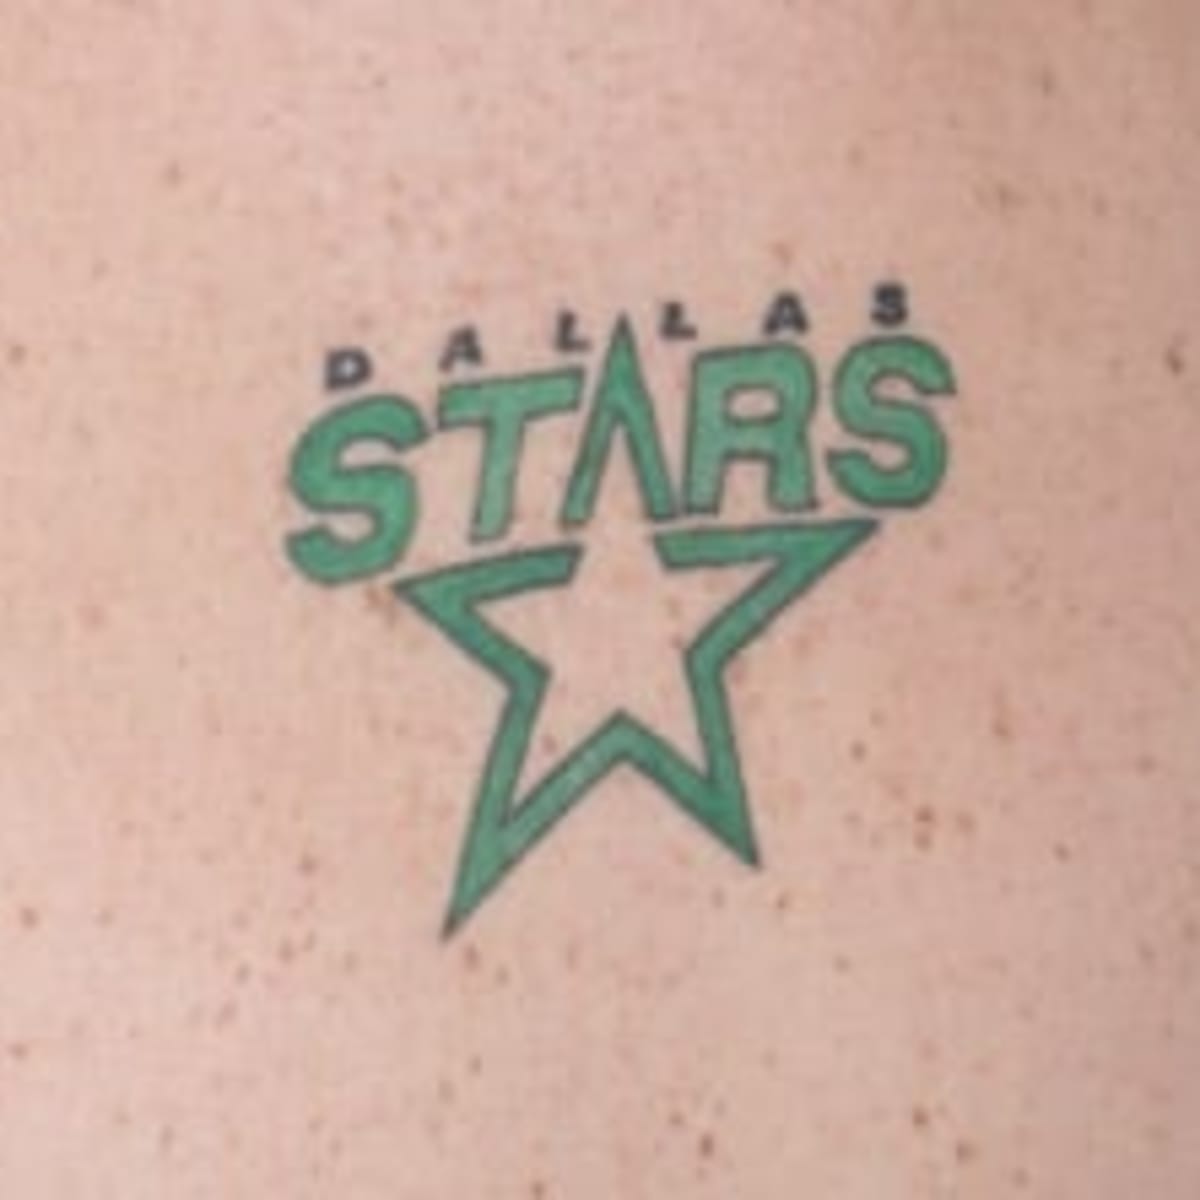 Got this tattoo last night not super happy with it and my wallet got  stolen while I was getting it Luck of the Stars I guess  rDallasStars